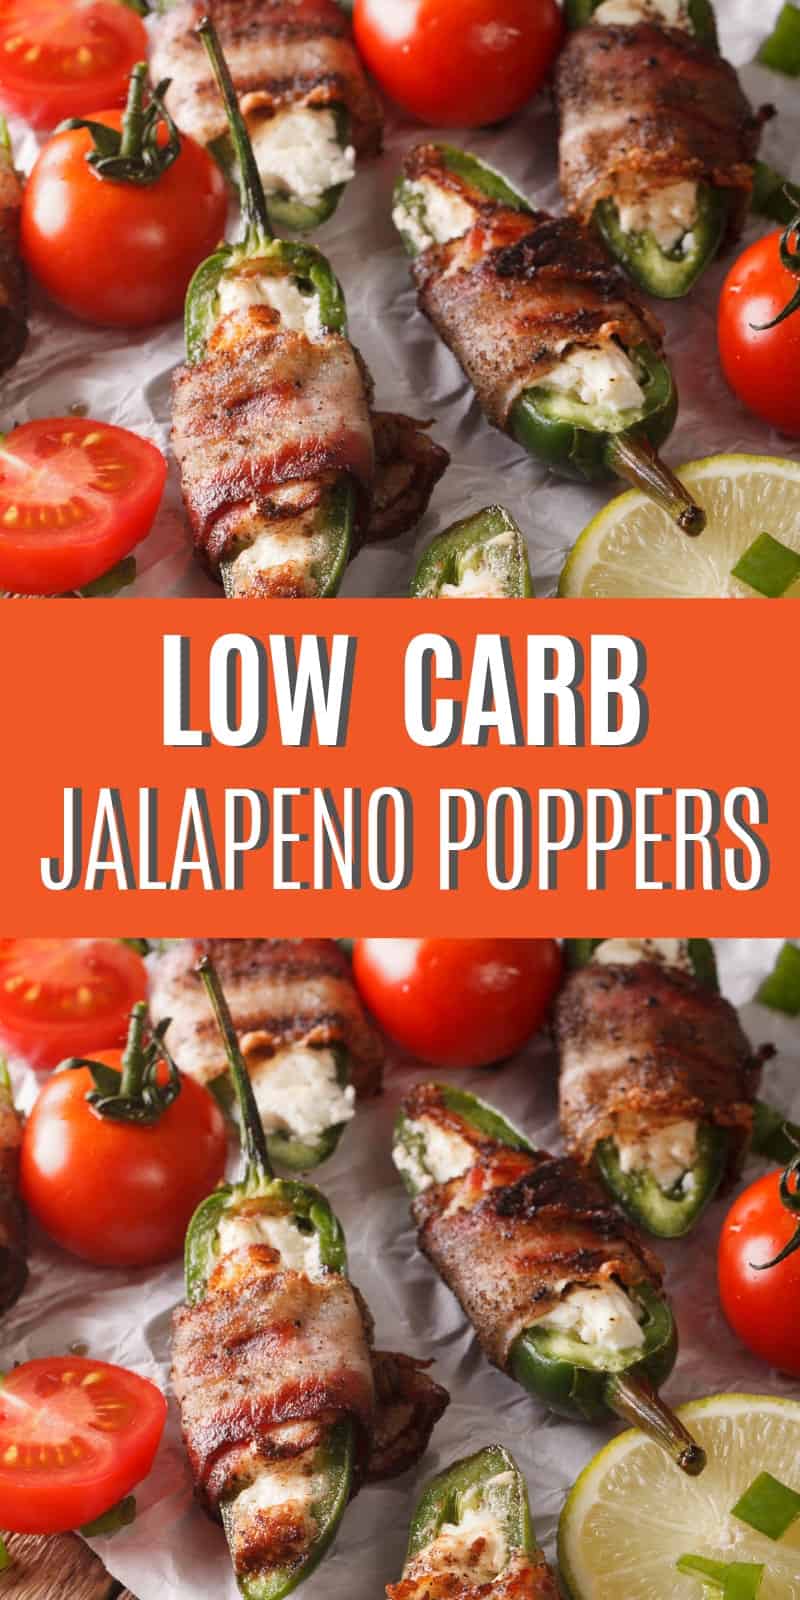 These easy low carb bacon wrapped jalapeno poppers with cream cheese are the perfect snack for the keto diet or your next get together with friends. Must try!